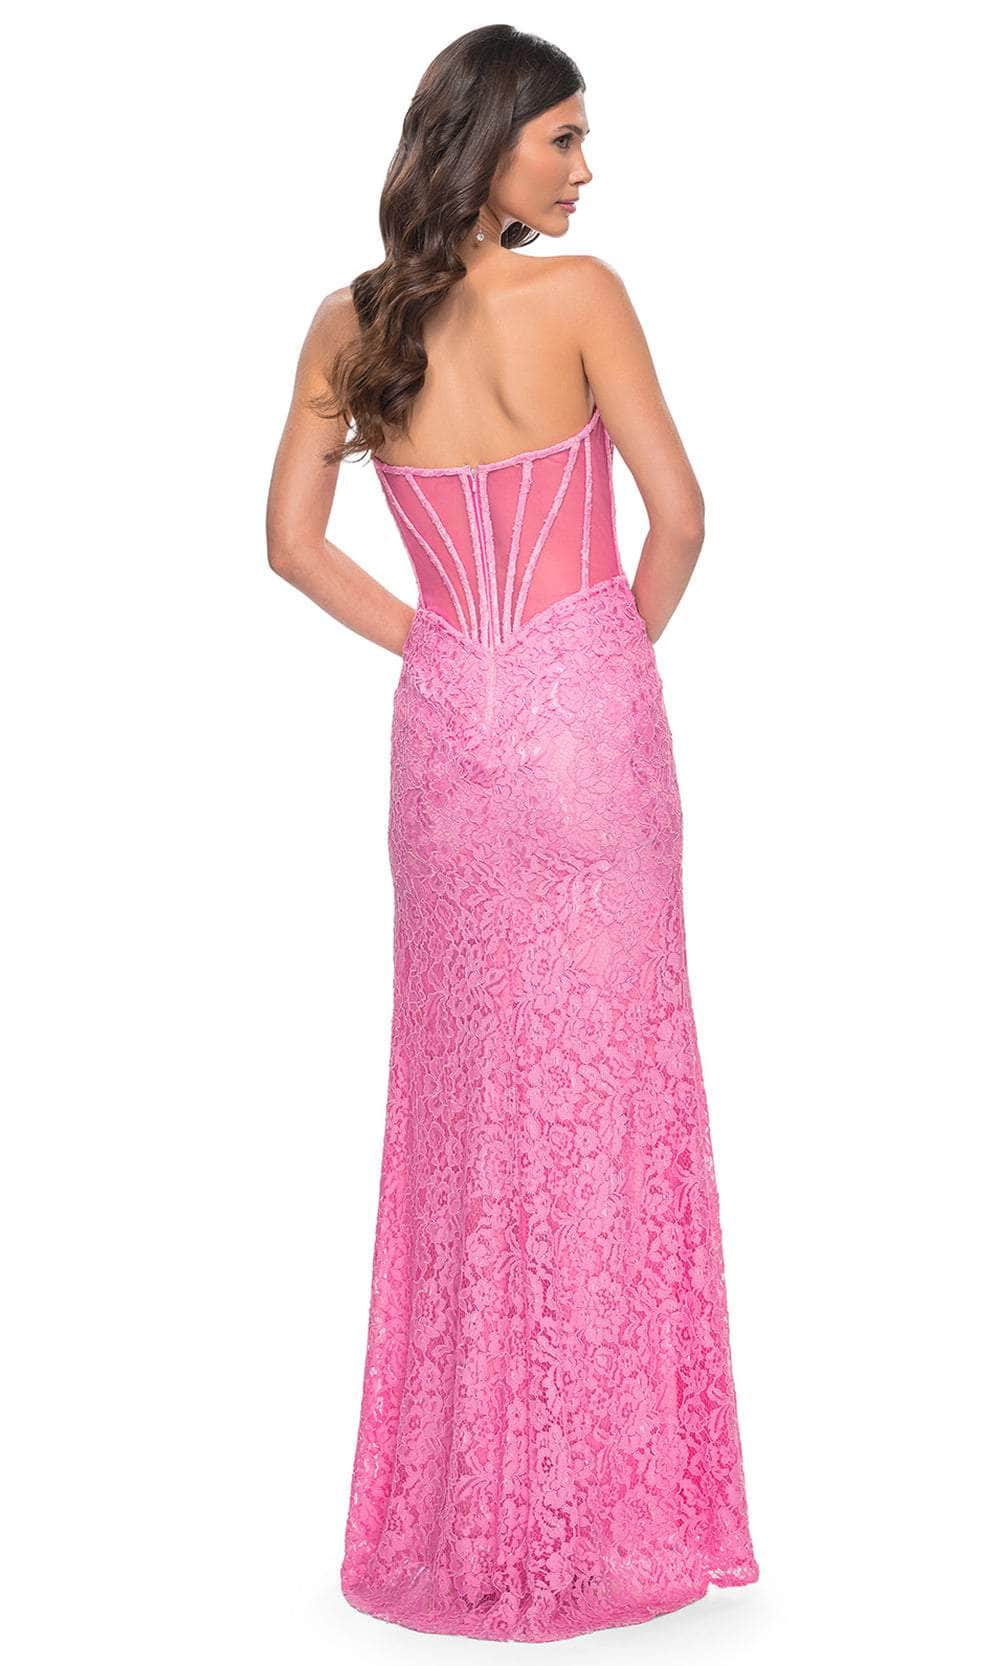 La Femme 32298 - Strapless Sweetheart Prom Gown Prom Dresses